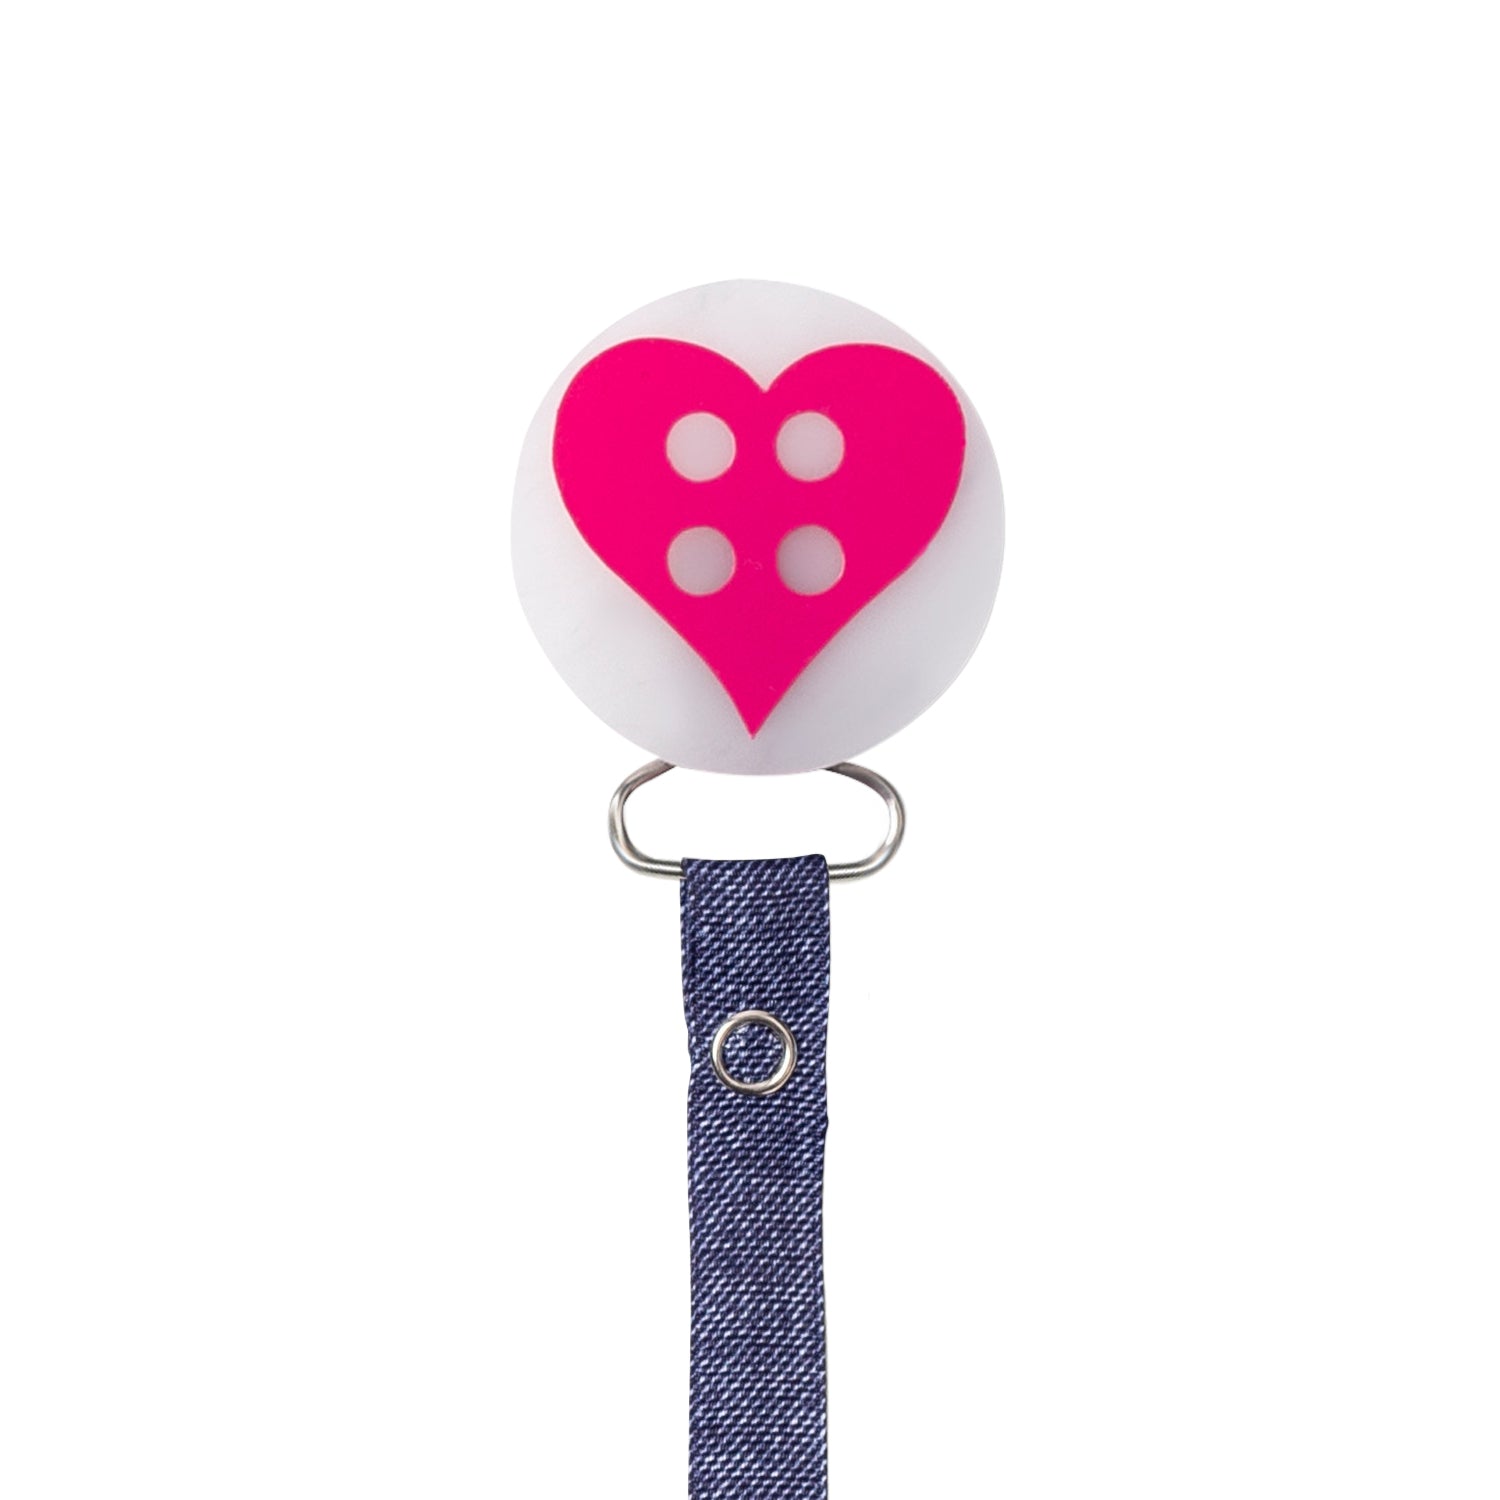 Classy Paci "cute as a button" Hot pink heart, denim/black for baby toddler girls pacifier clip Friggs Bibs Gift Set